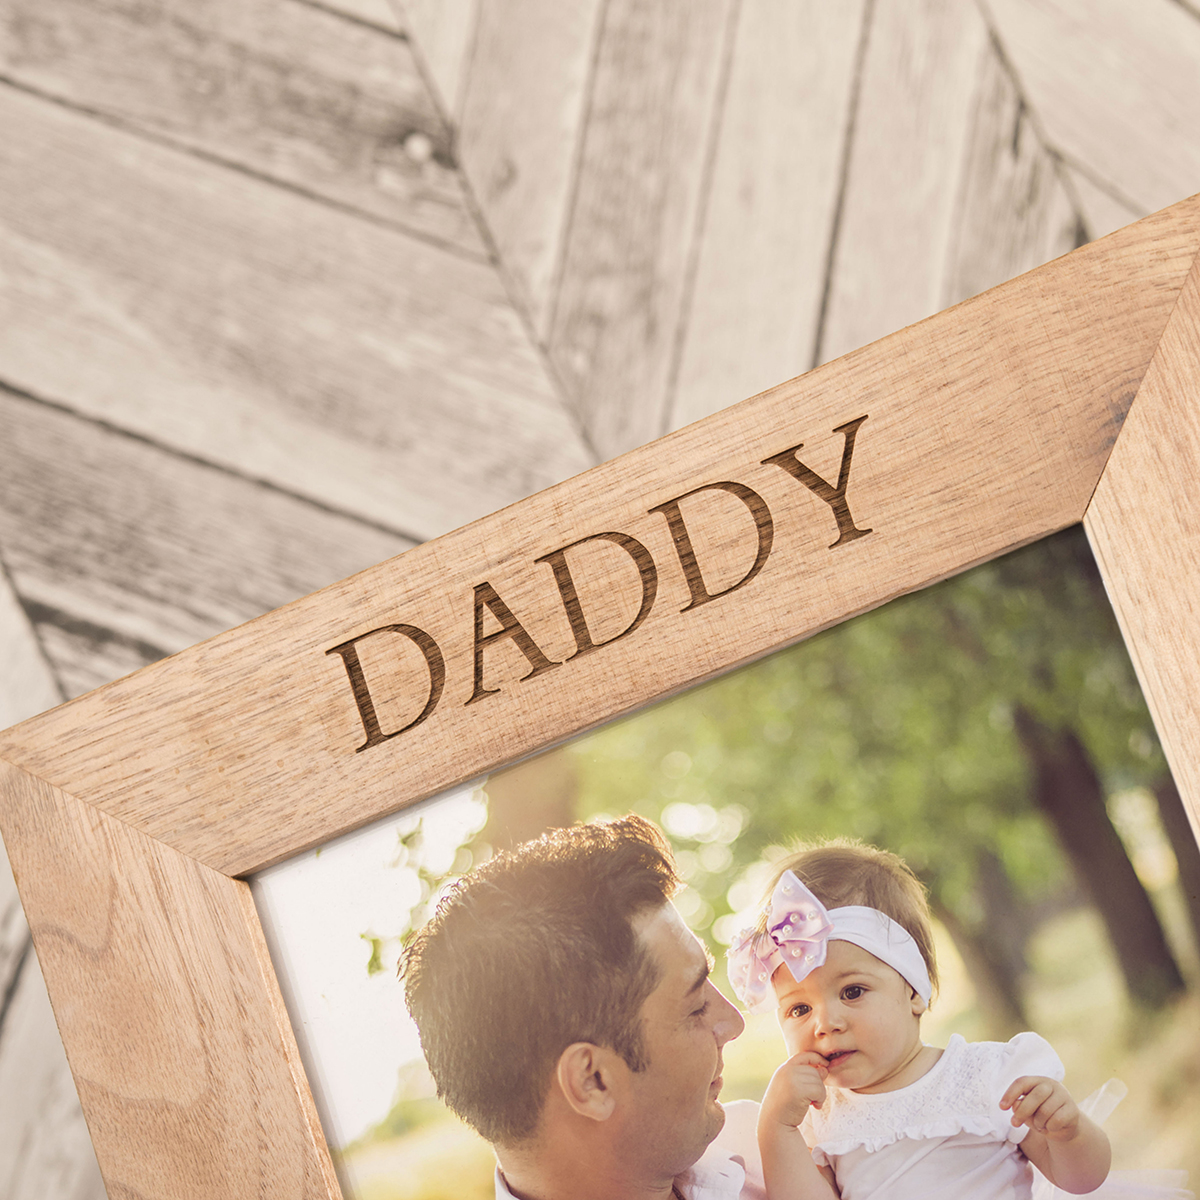 Personalised Wooden Photo Frame - A Daughter's First Love